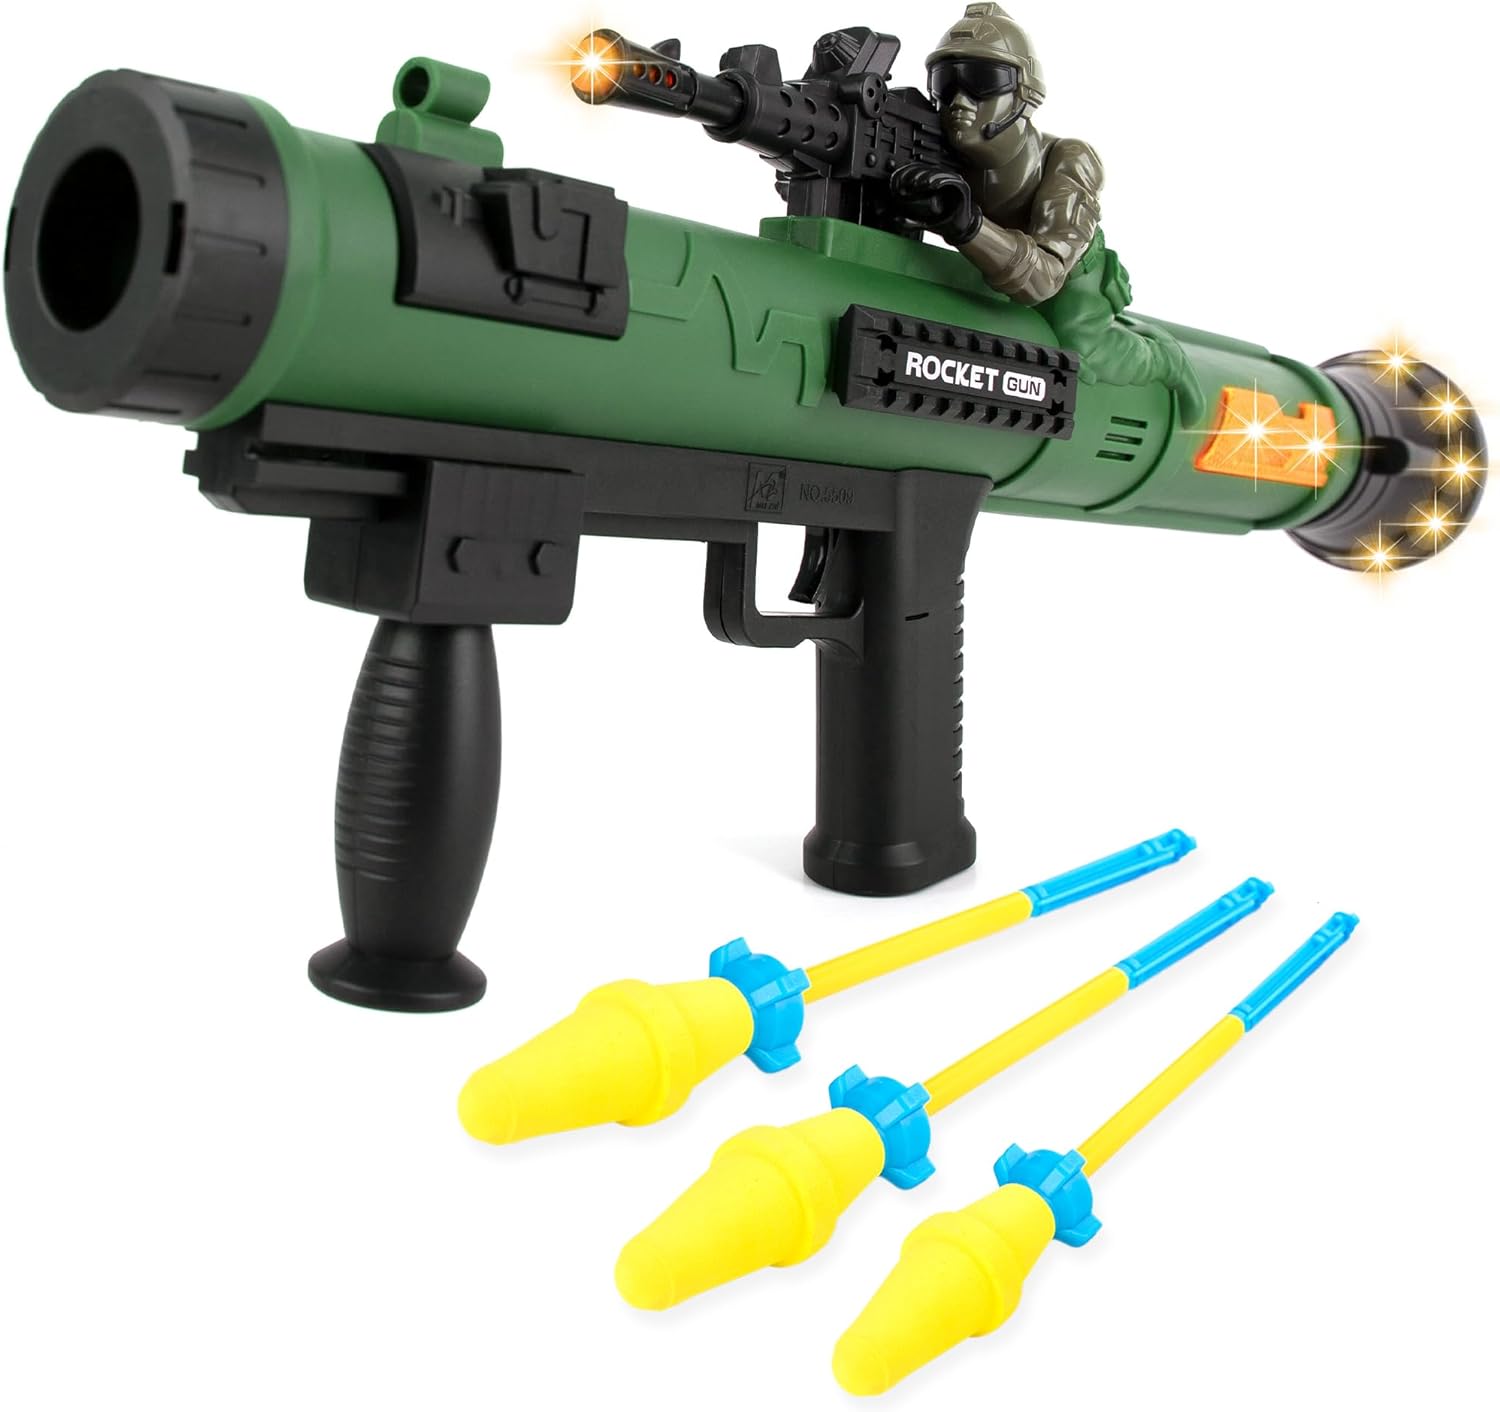 ArtCreativity Toy Rocket Launcher, RPG Gun with 3 Foam Rockets, Light Up Rocket Launcher Gun for Kids, Cool Sound, Vibration, & LED Effects, Military Pretend Play Bazooka Toys for Boys